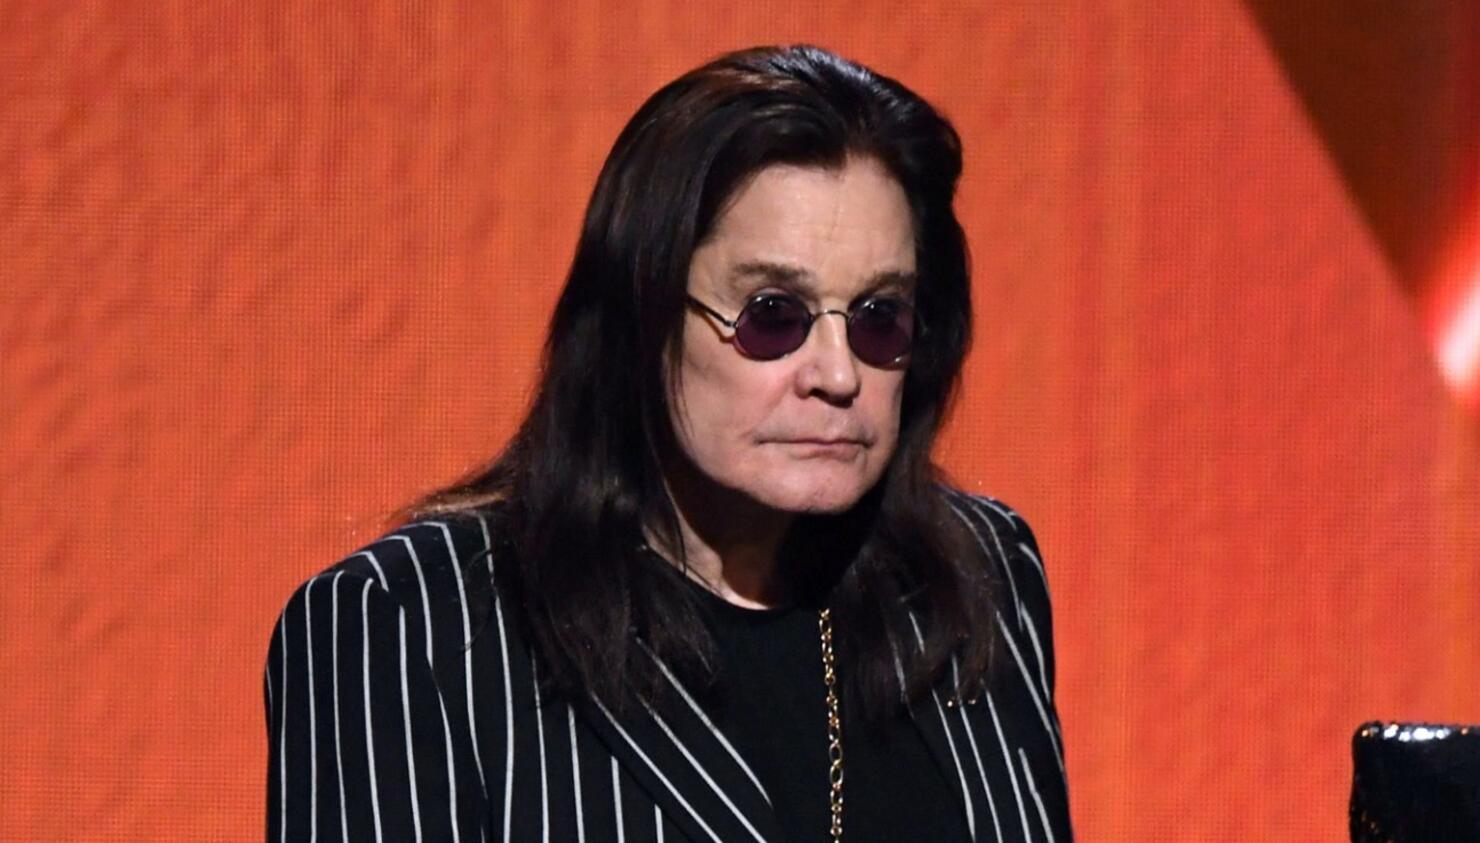 Ozzy Osbourne Cancels 2020 North American Tour To Get Medical Treatment